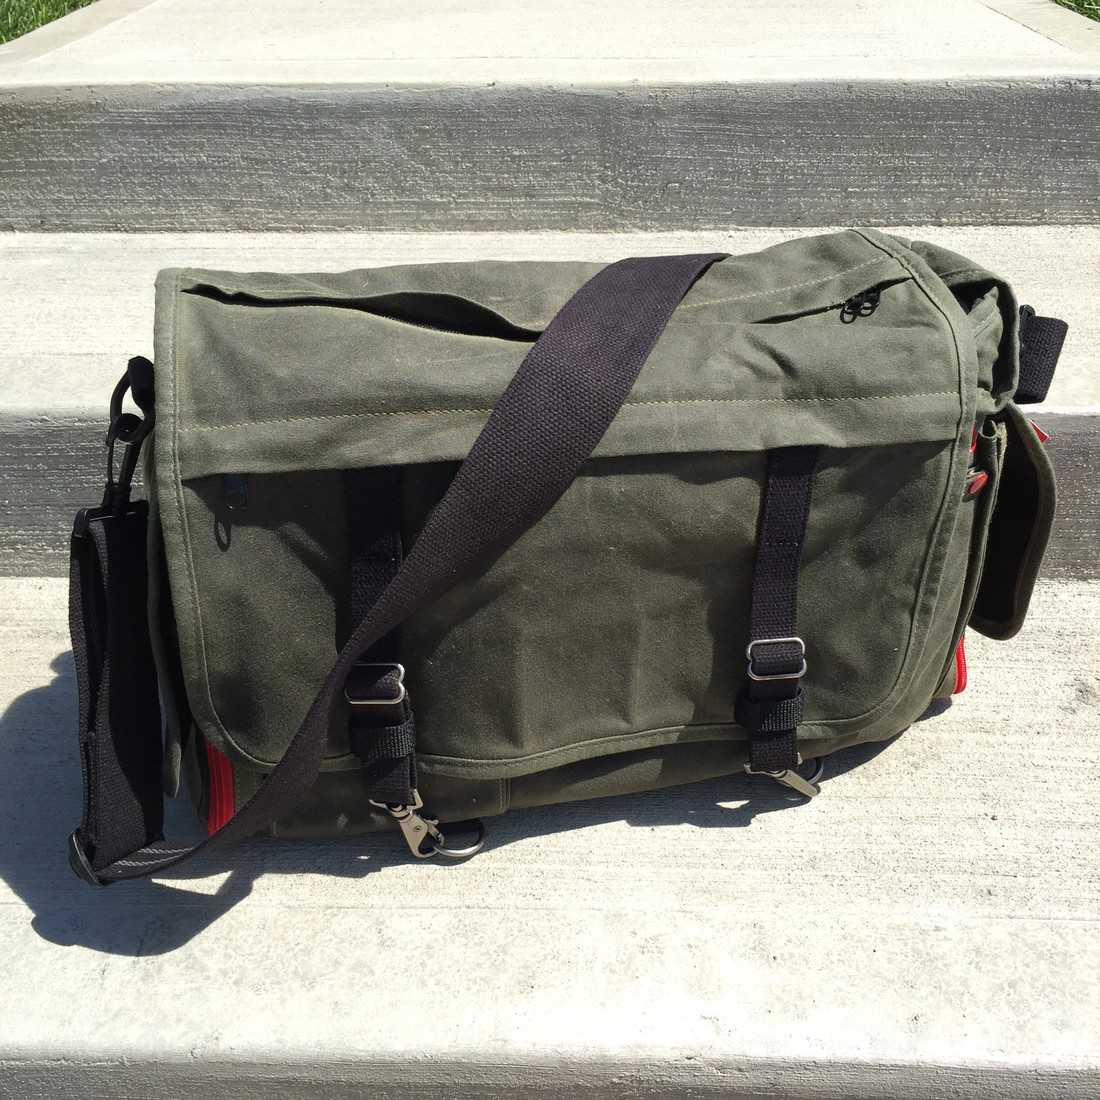 17 Camera Messenger Bags (Hands-On Review): What’s the best messenger